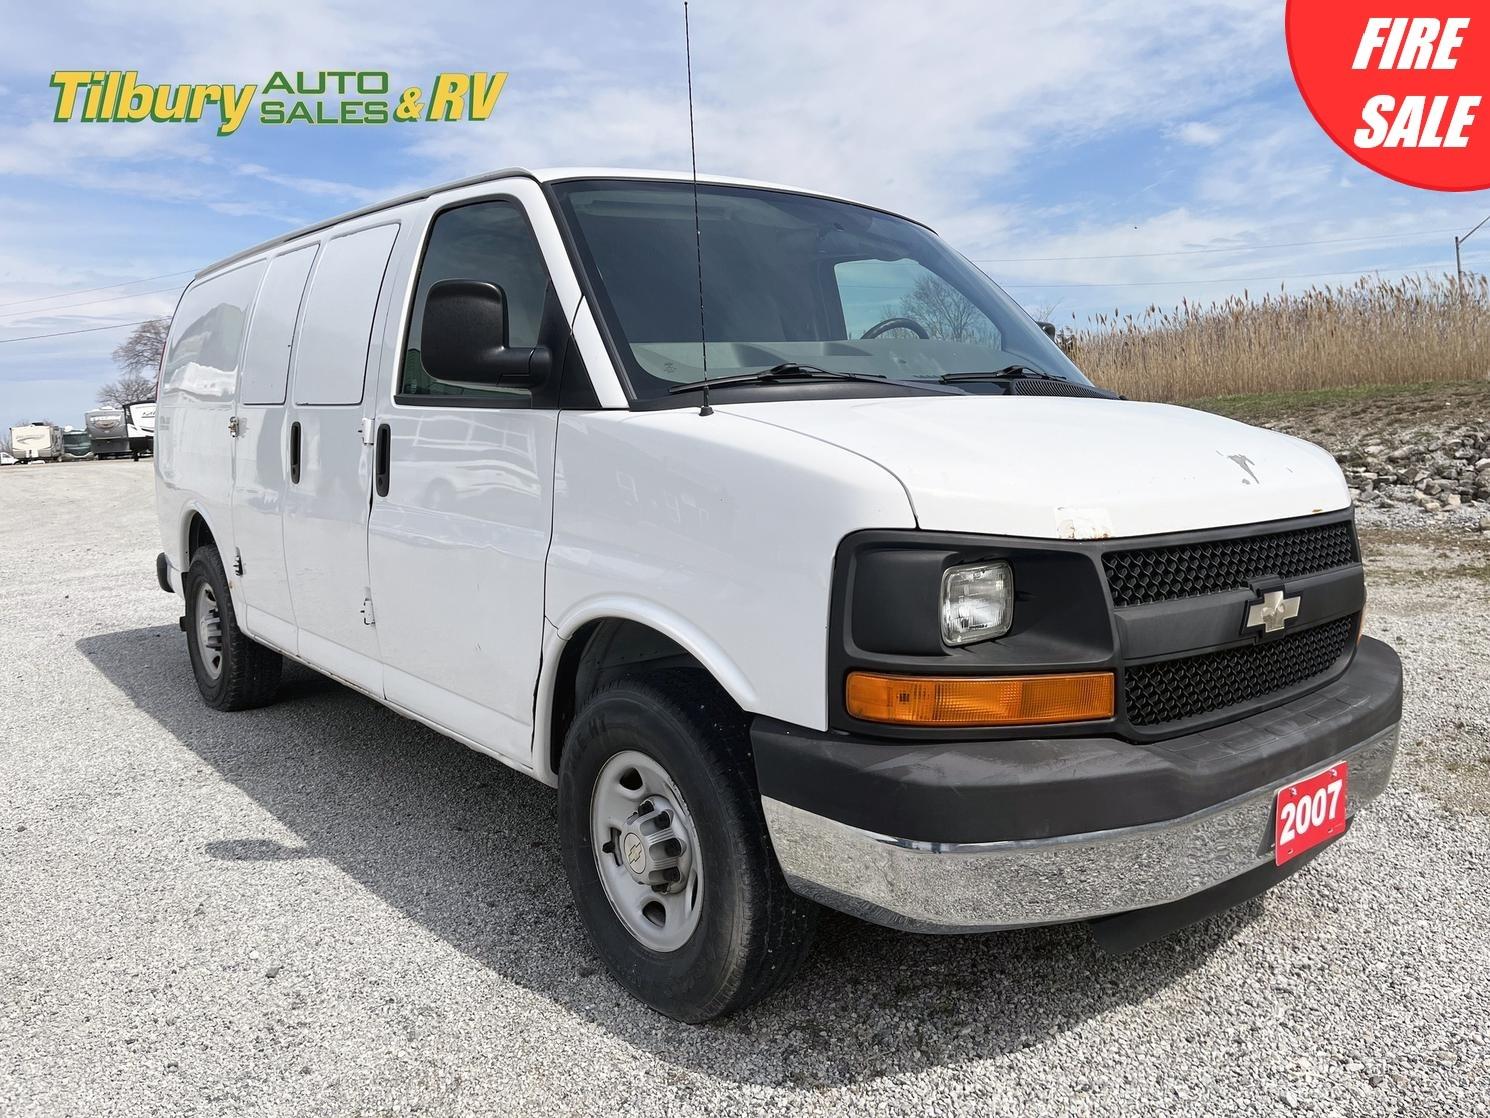 2007 Chevrolet Express RWD 3500 135 (AS IS)